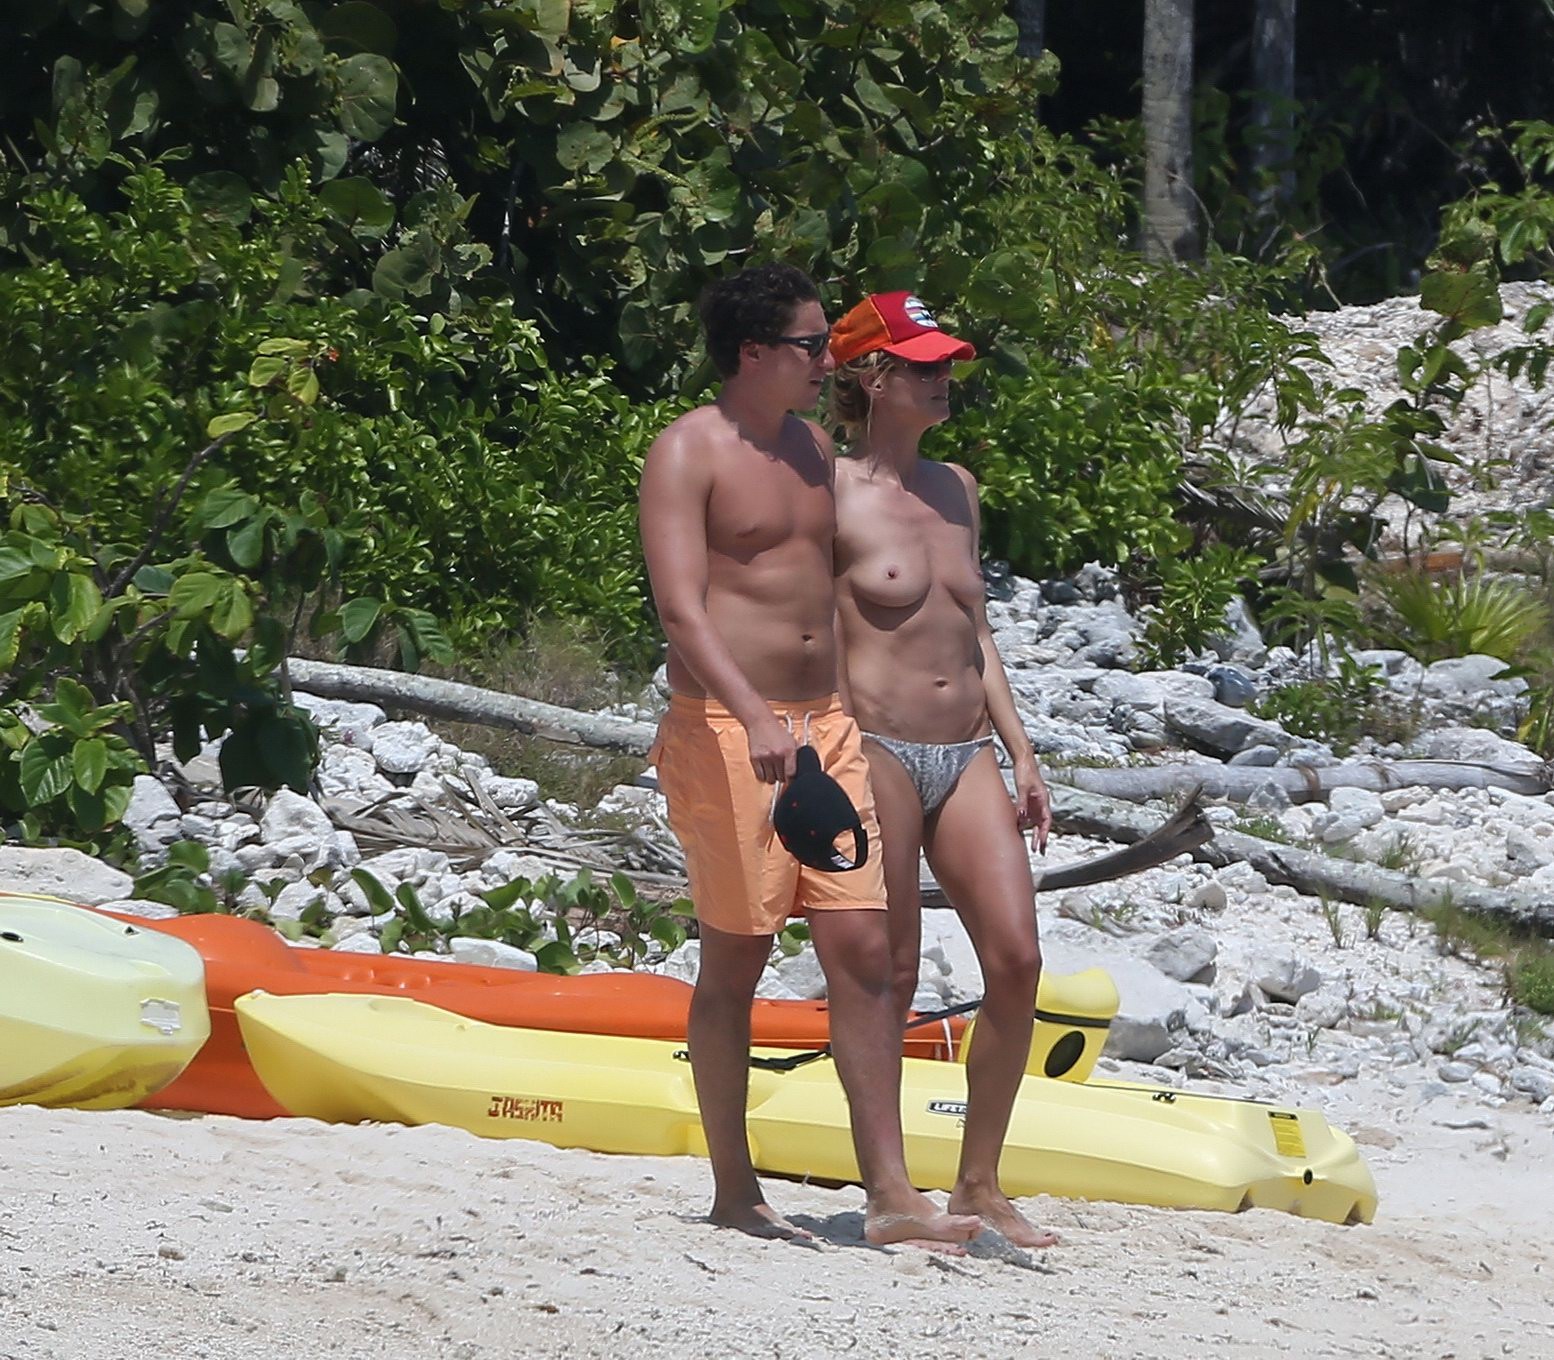 Heidi Klum teasing topless with her BF at the beach in Mexico #75199058